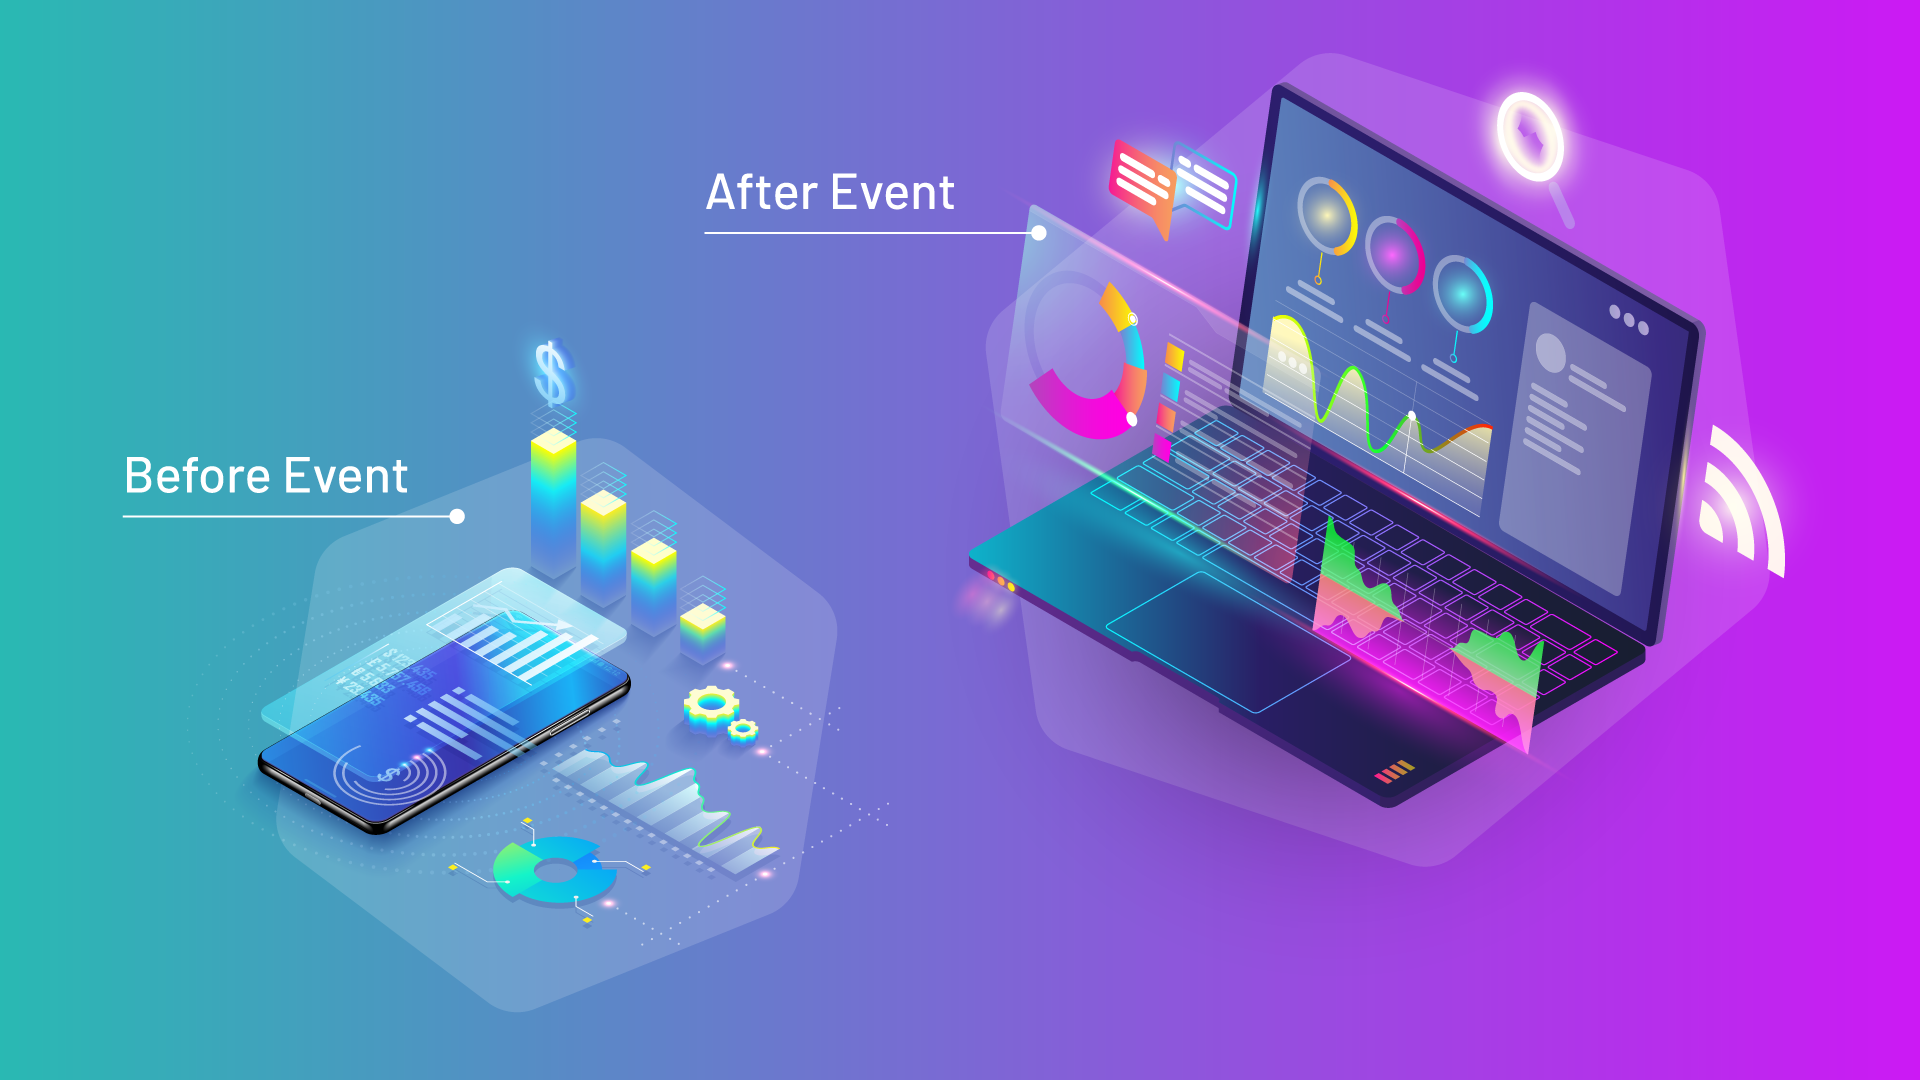 identifying and analyzing event data before and after an event